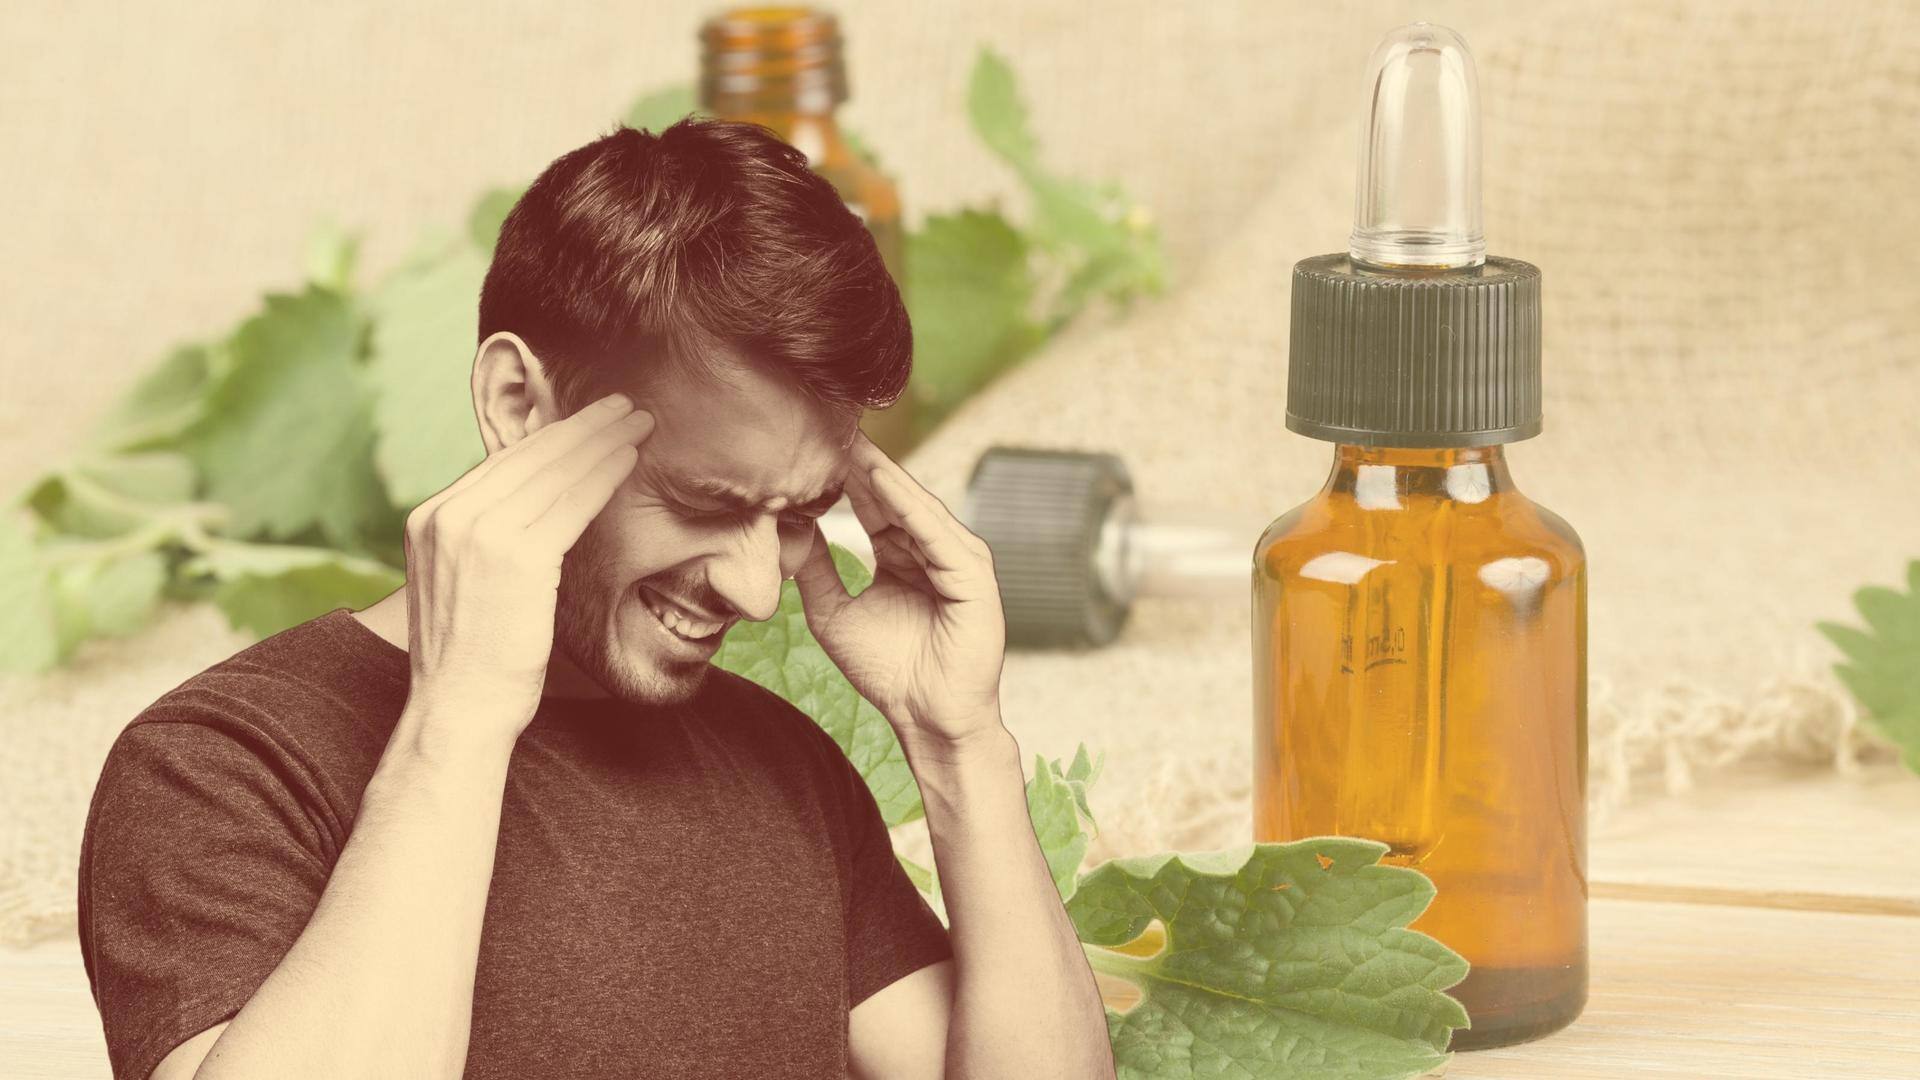 Try these essential oils for fixing your headache